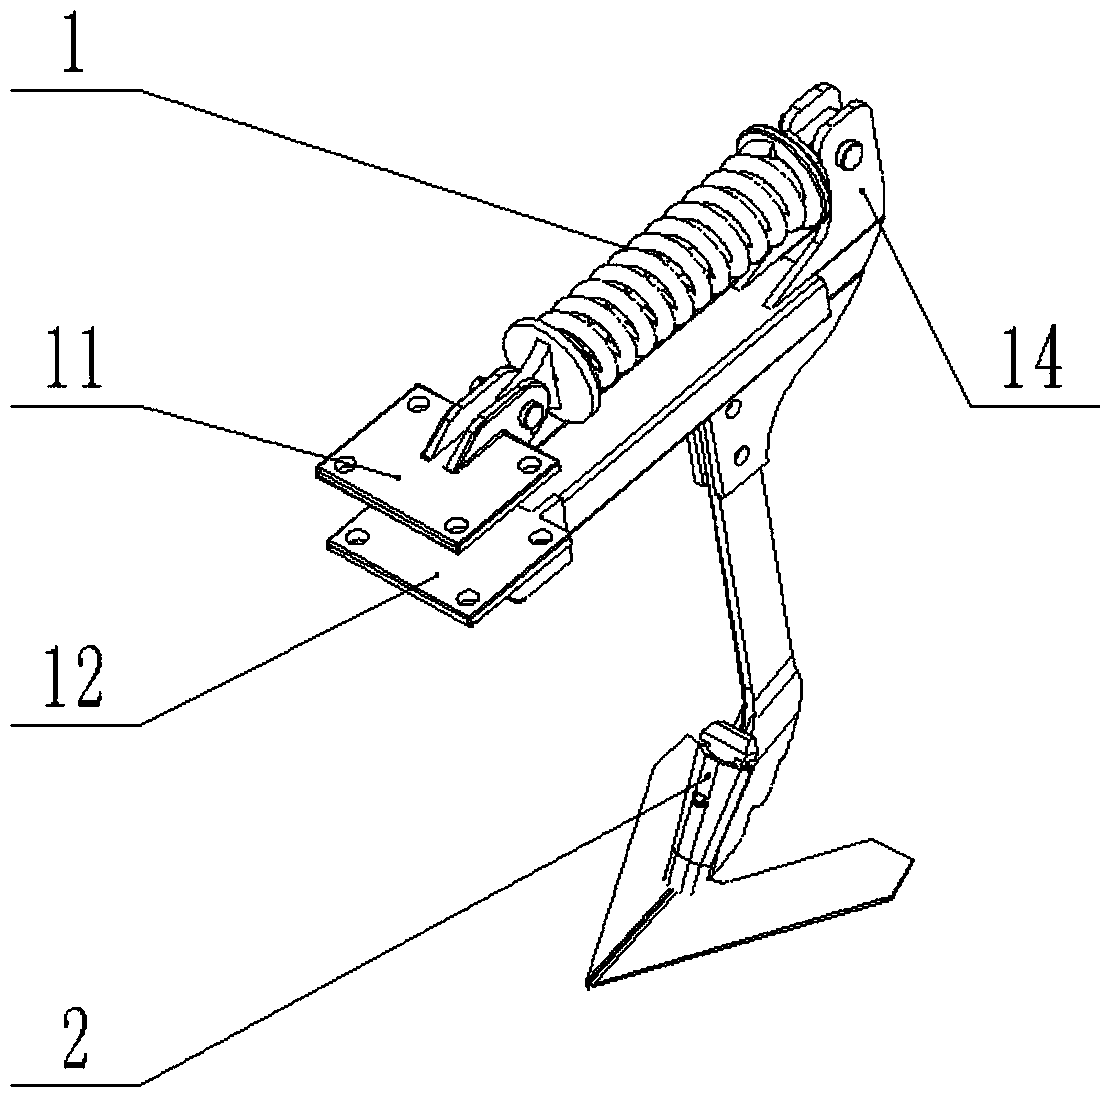 A drag-reducing subsoiling and cultivating device for quickly replacing subsoiling and cultivating shovel tips